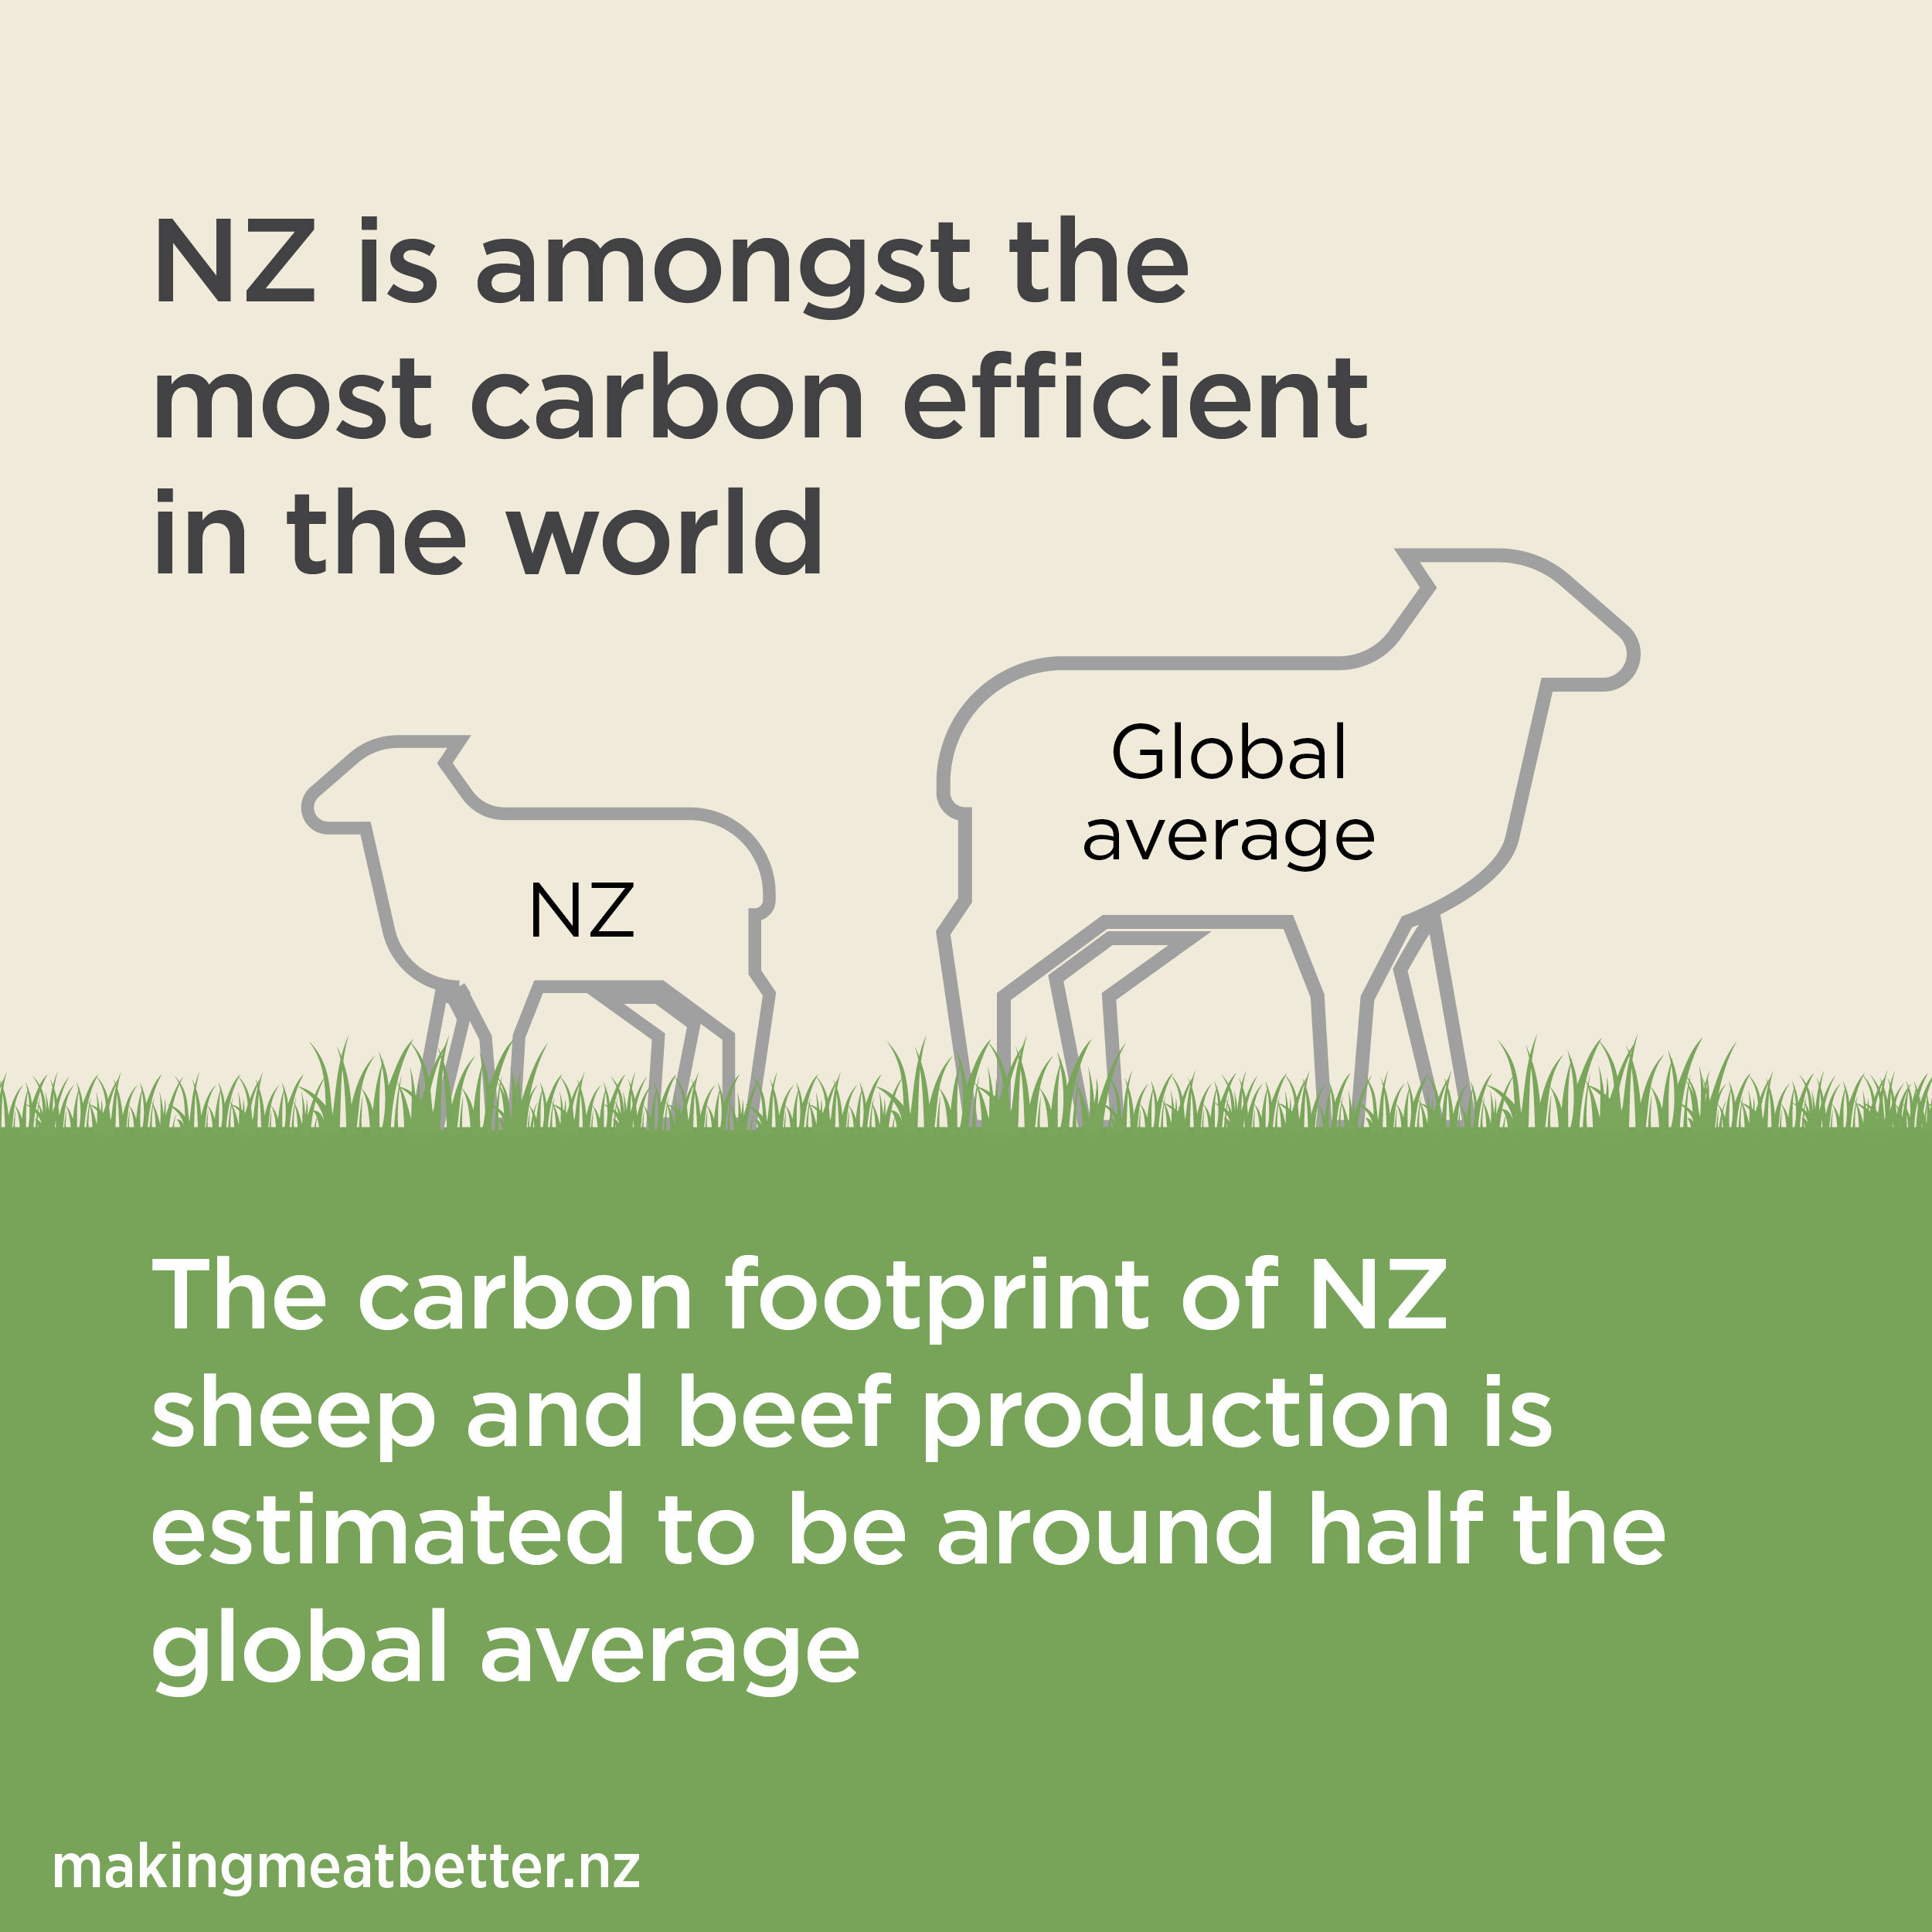 We’re the most efficient producers of red meat  NZ sheep and beef production’s carbon footprint per kilo is one quarter of the average figure globally 